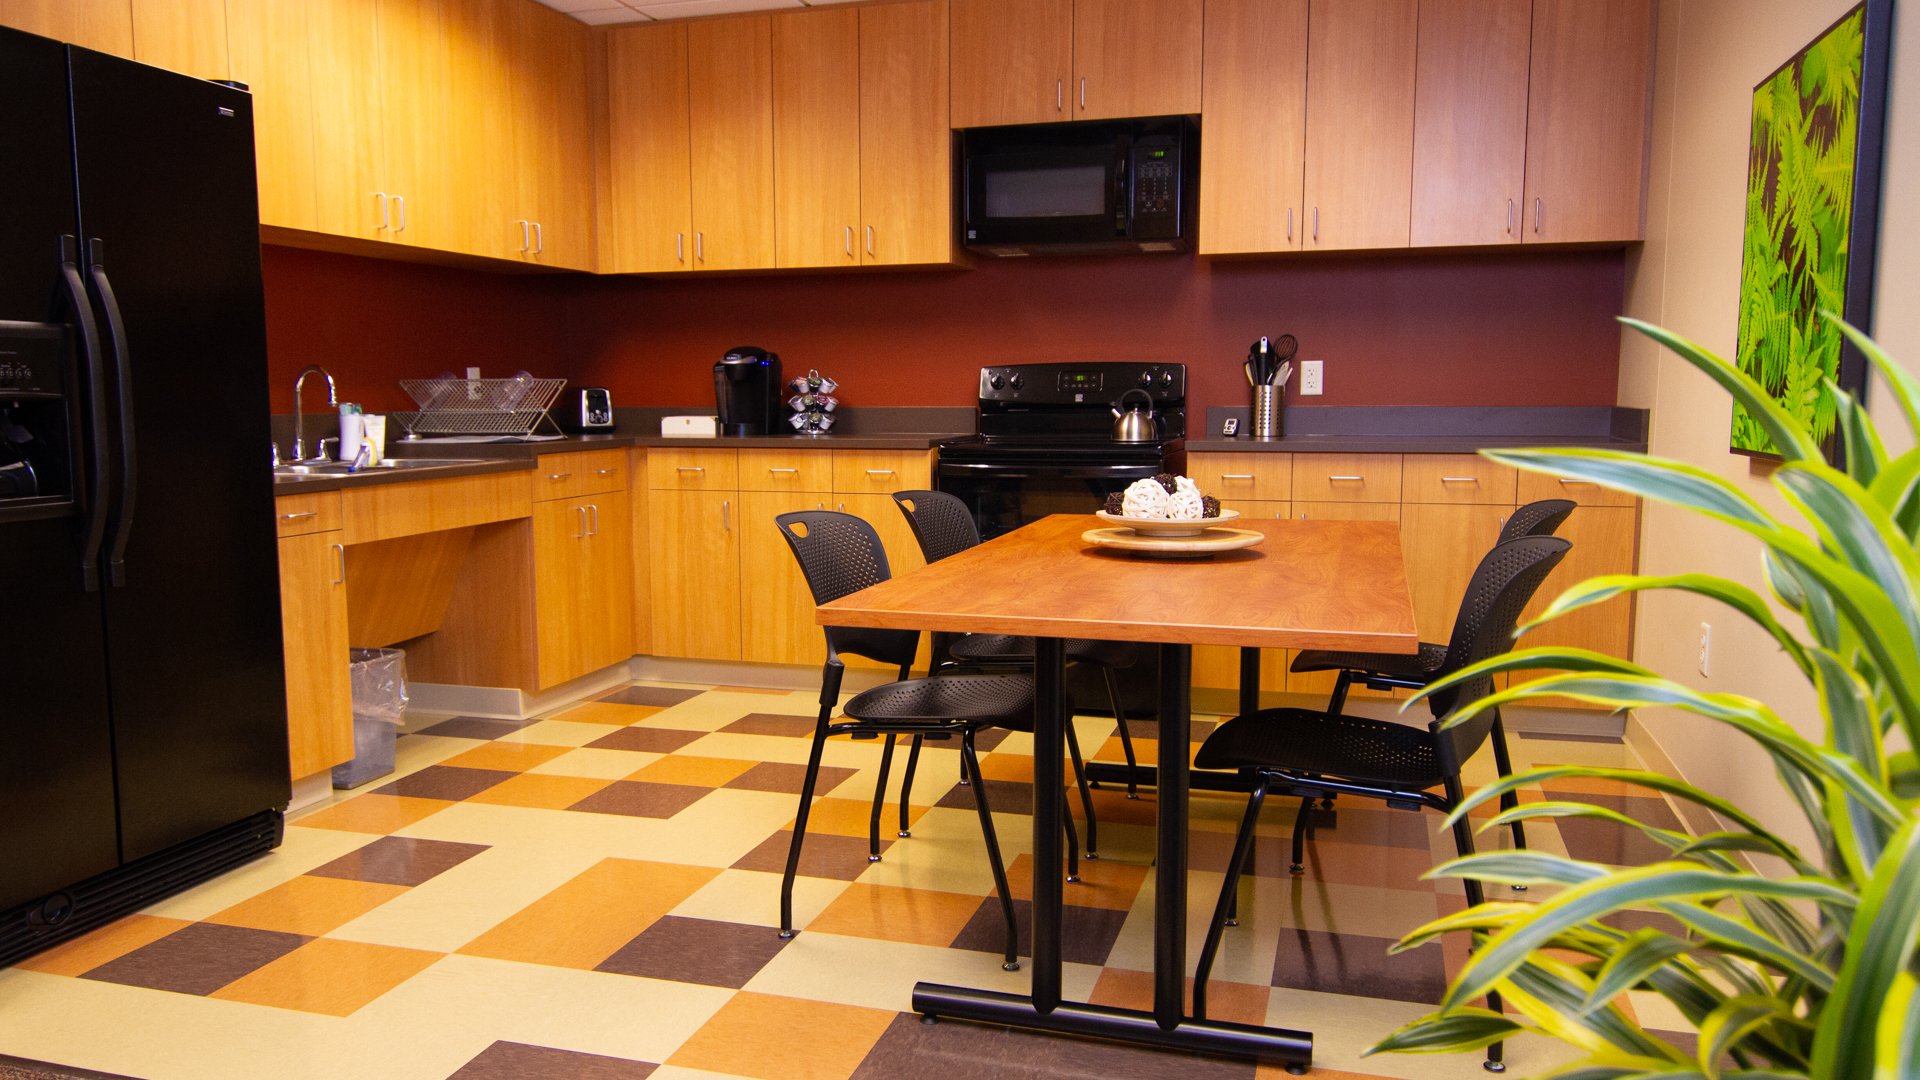 Kitchen, break room and therapy training area